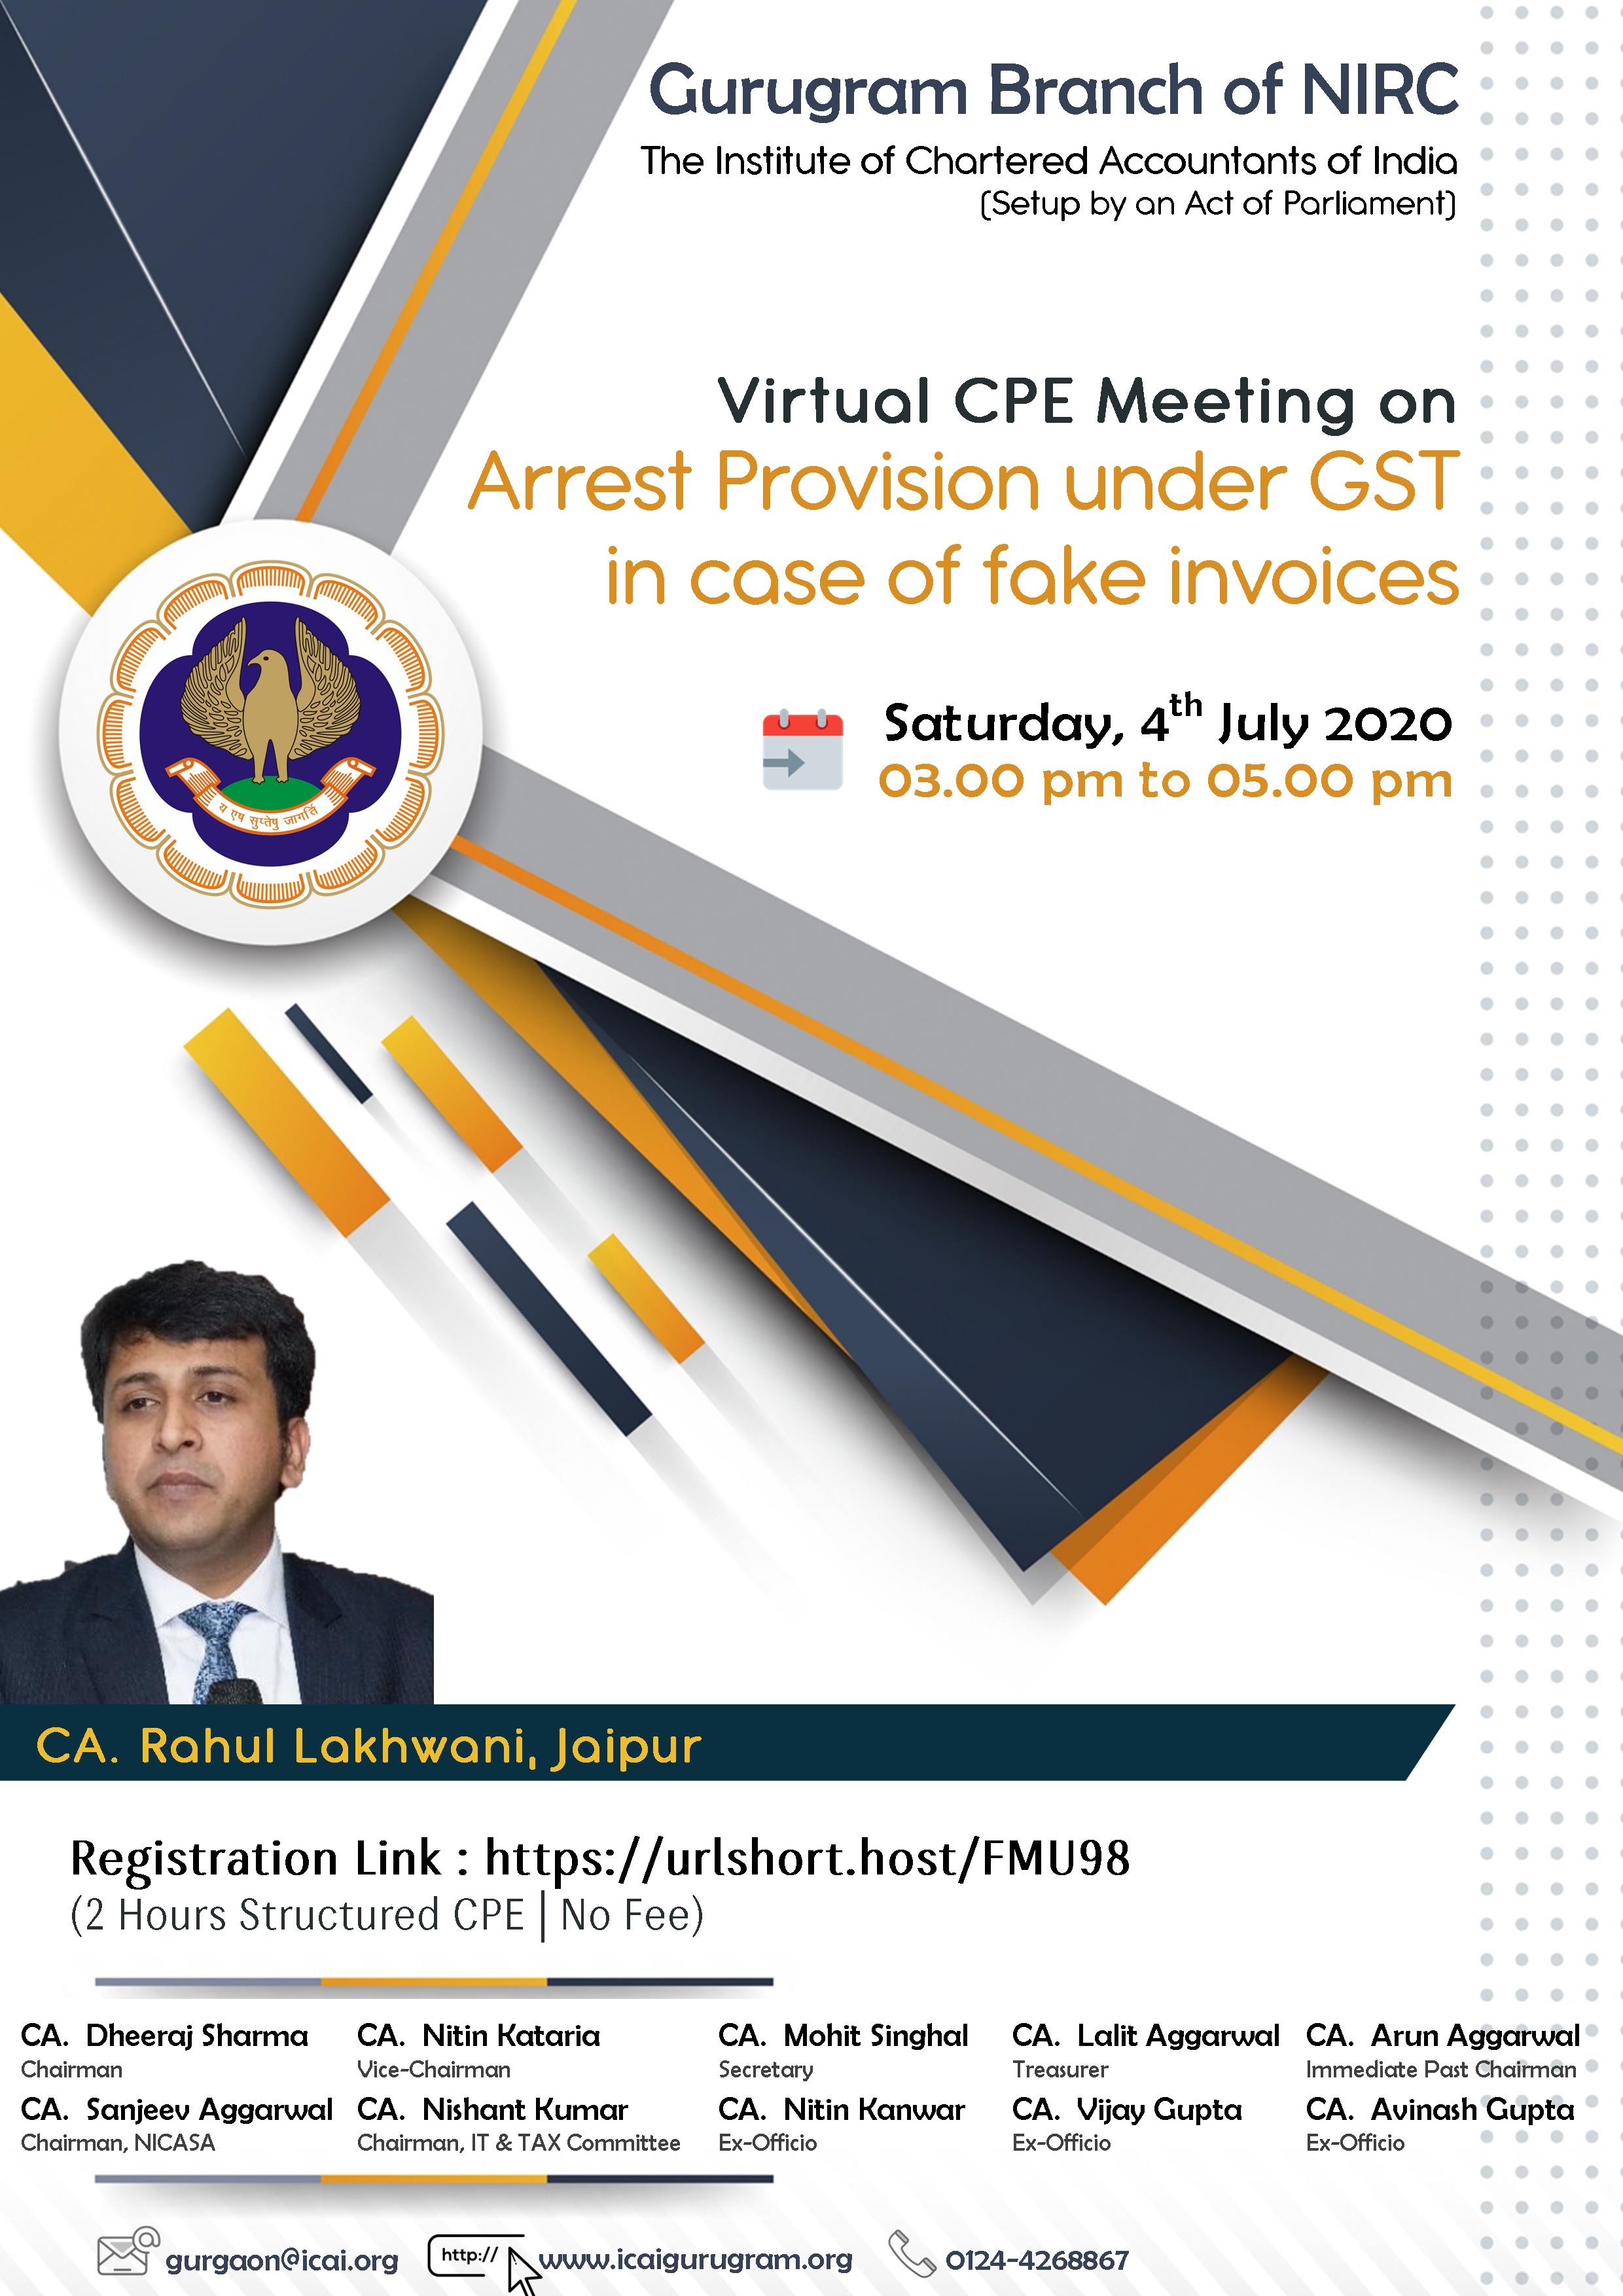 Virtual CPE Meeting on Arrest Provision under GST in case of fake invoices